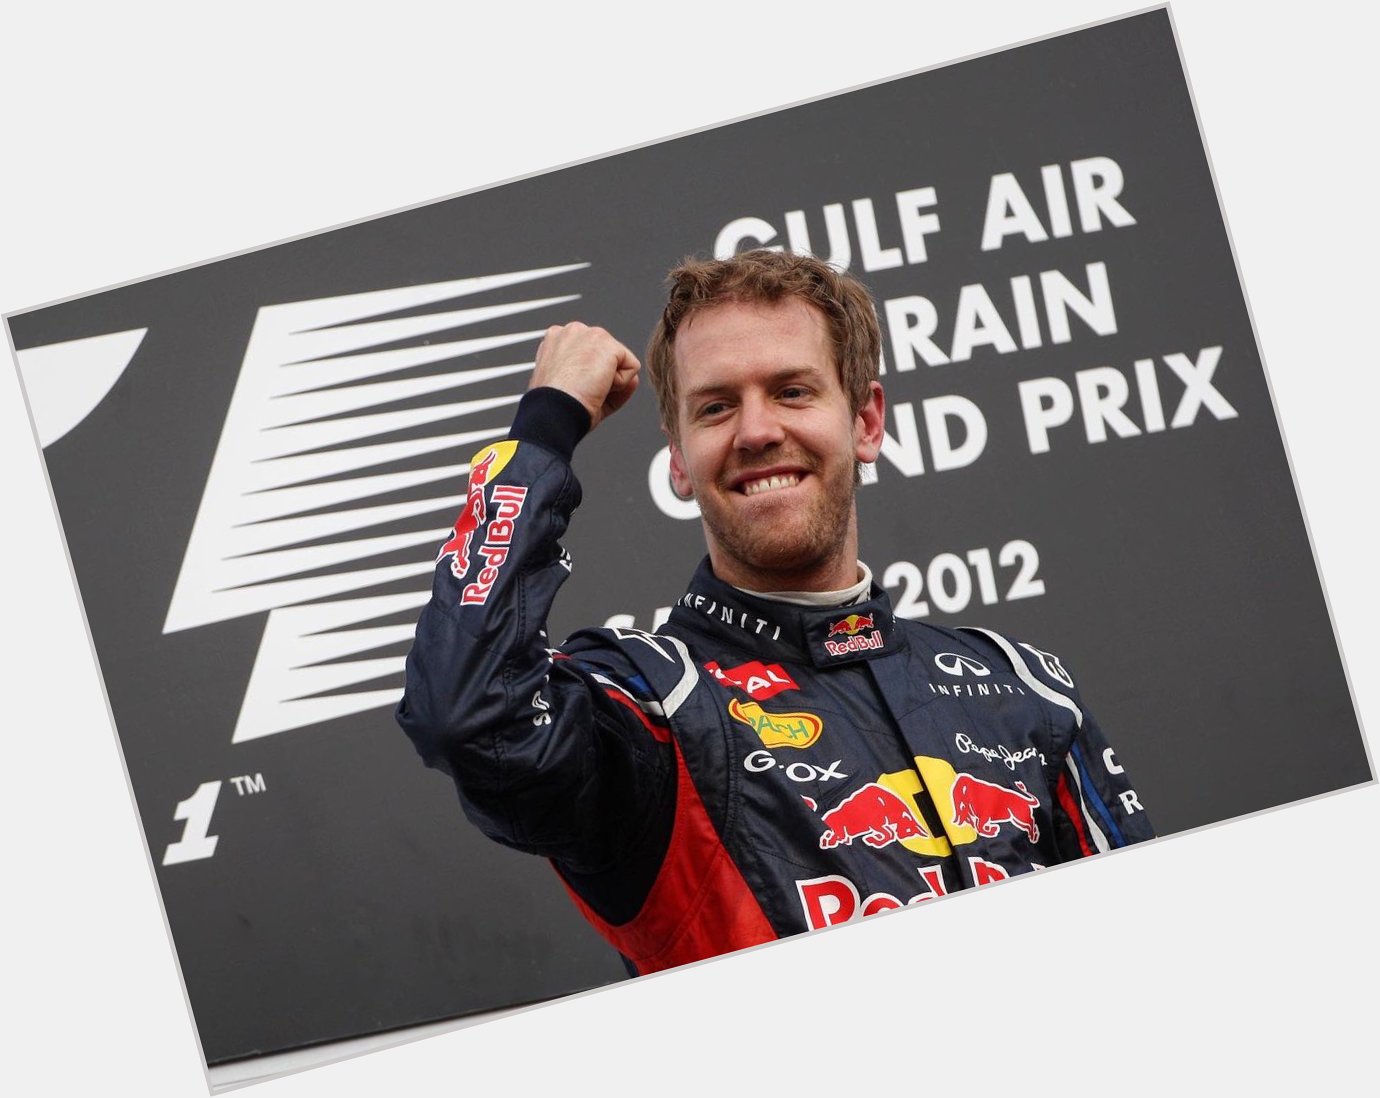 Happy birthday to Sebastian Vettel! Here he is back in 2012 celebrating his first victory of the season! 